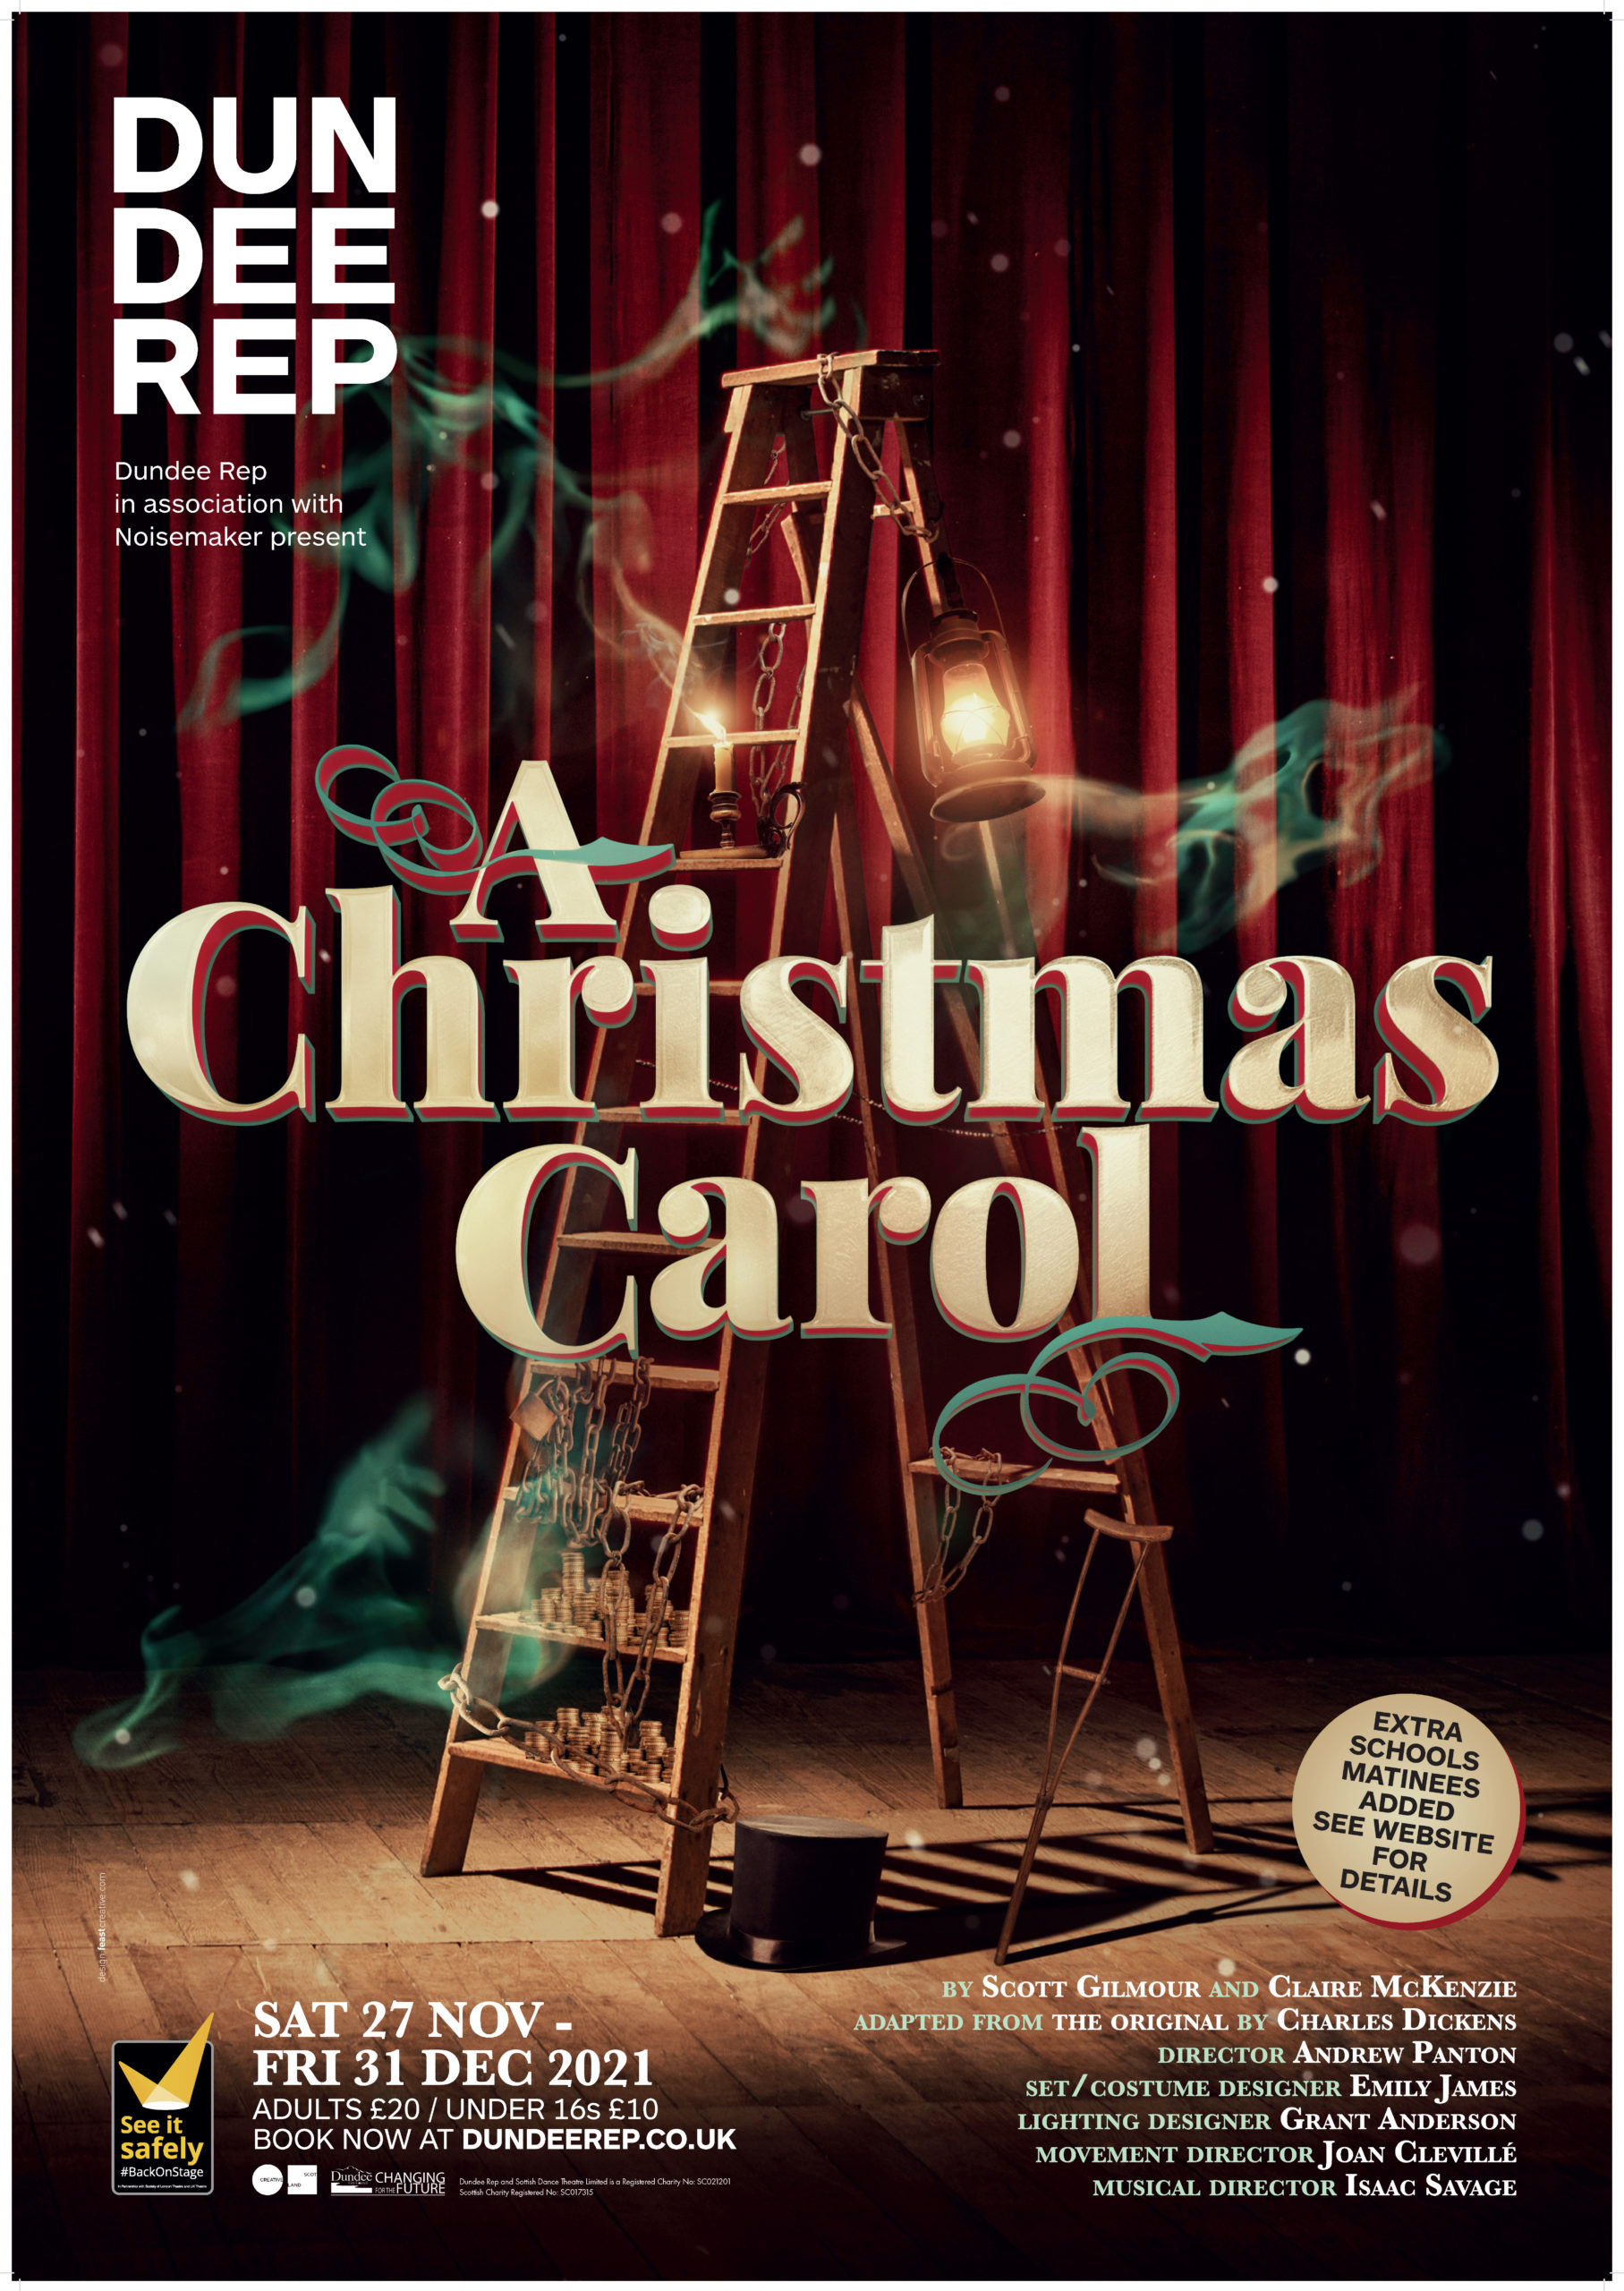  Dundee Rep presents the World Premiere of A Christmas Carol